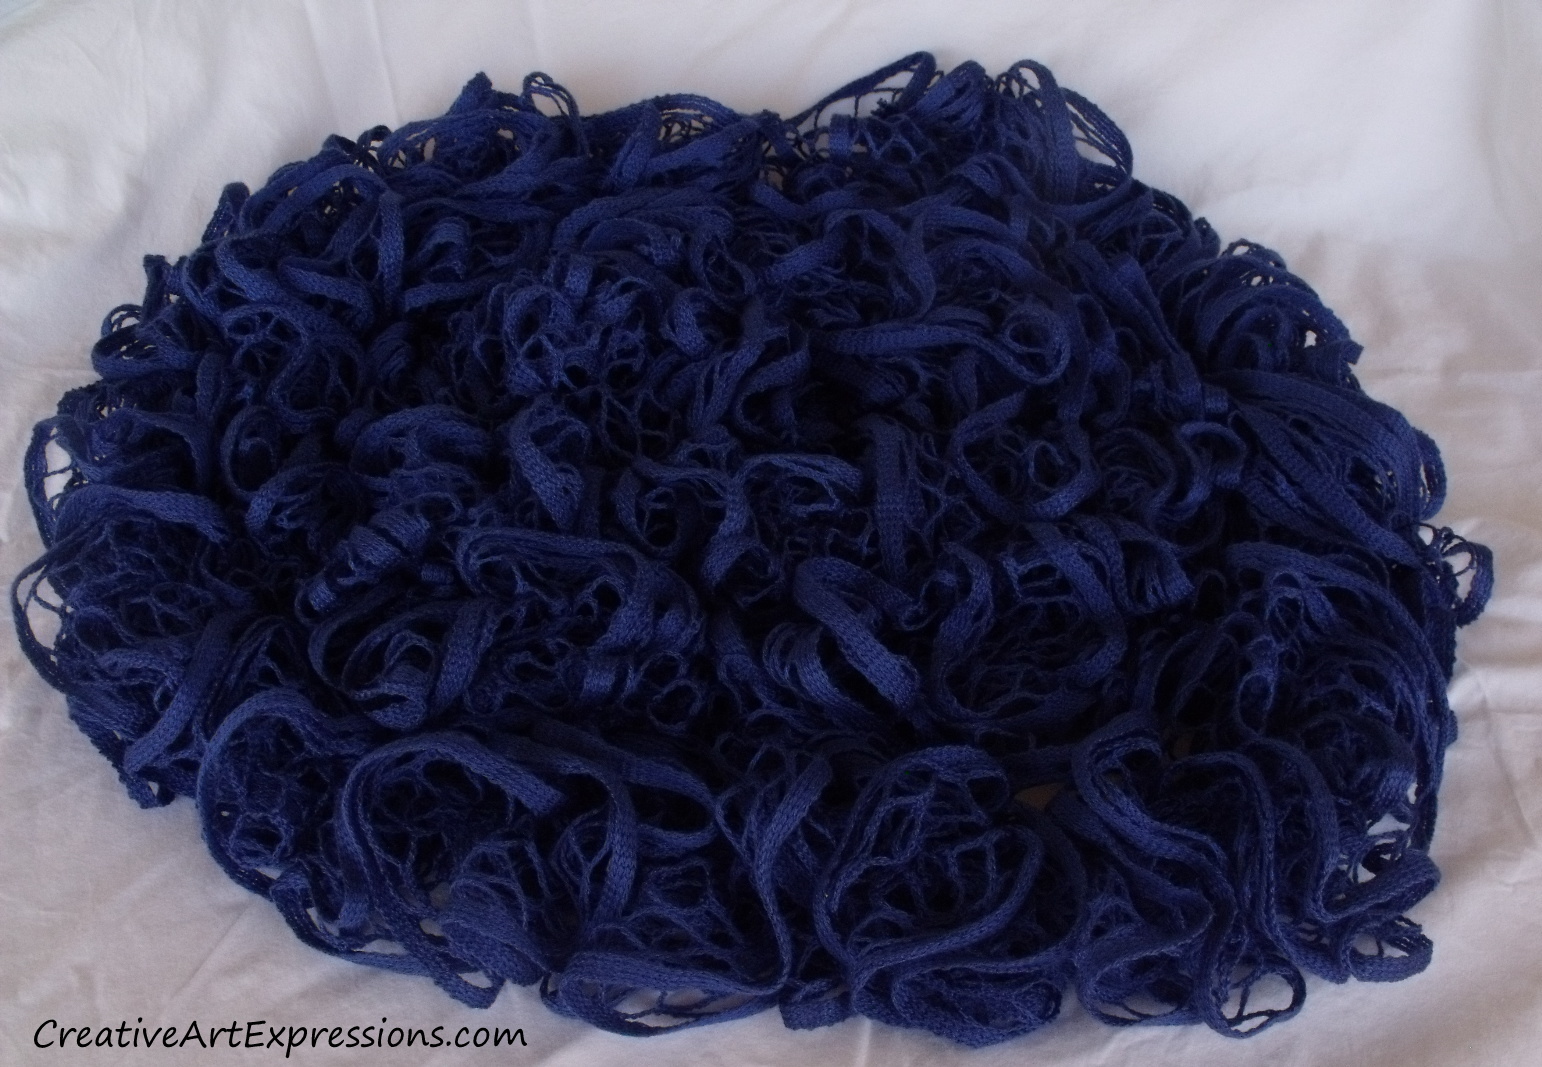 Creative Art Expressions Hand Knitted Royal Blue Baby Photo Prop Blanket